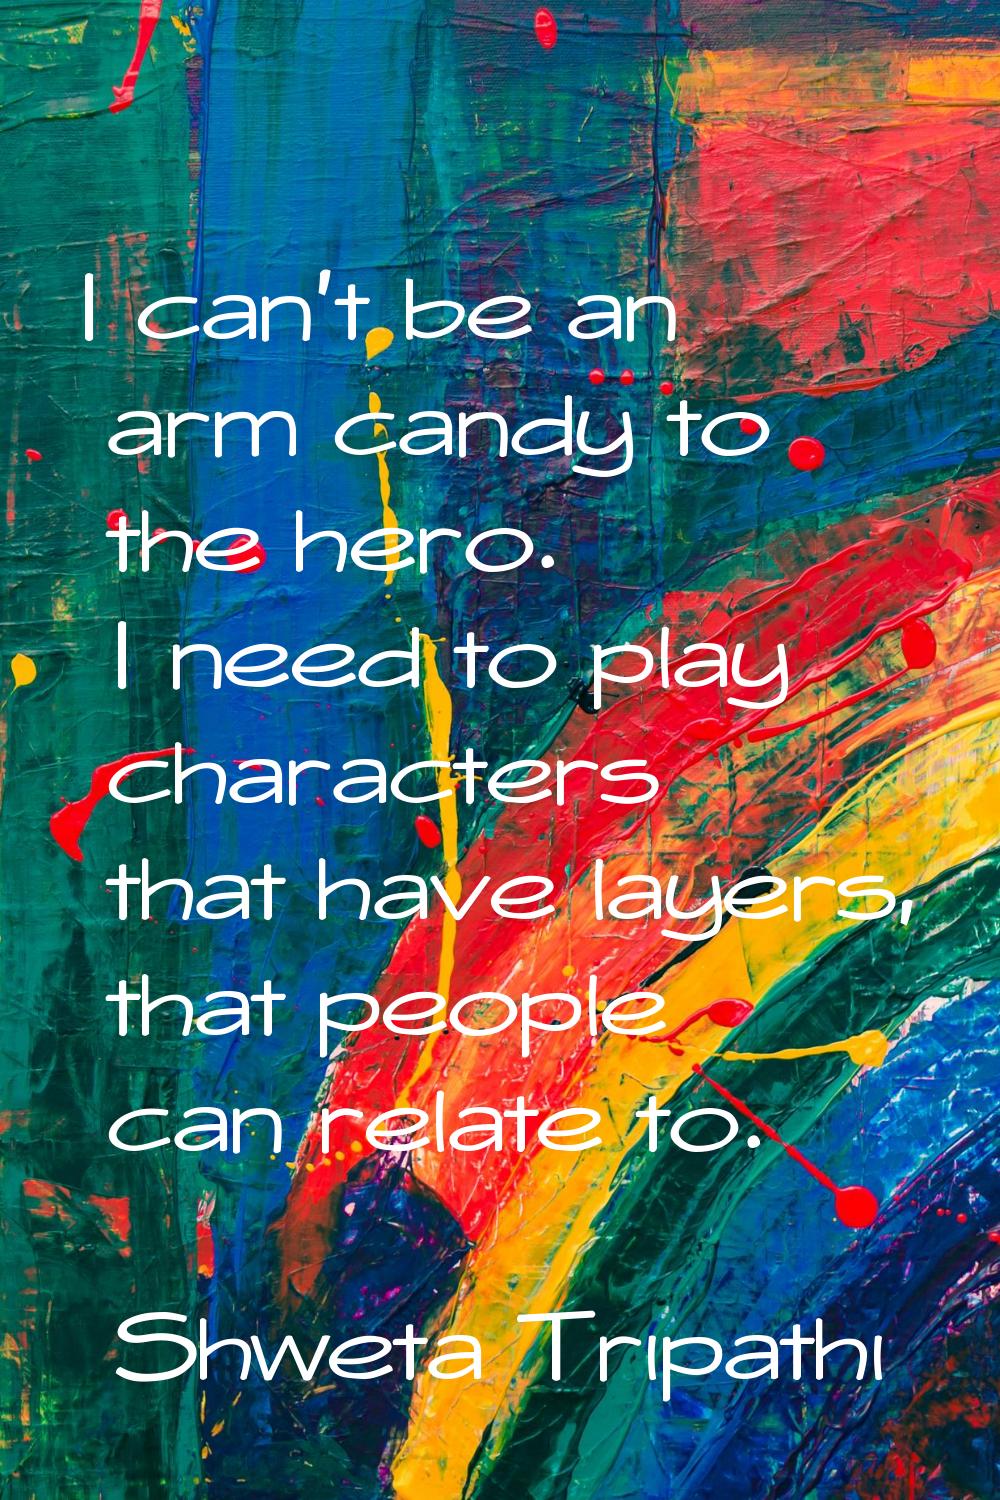 I can't be an arm candy to the hero. I need to play characters that have layers, that people can re